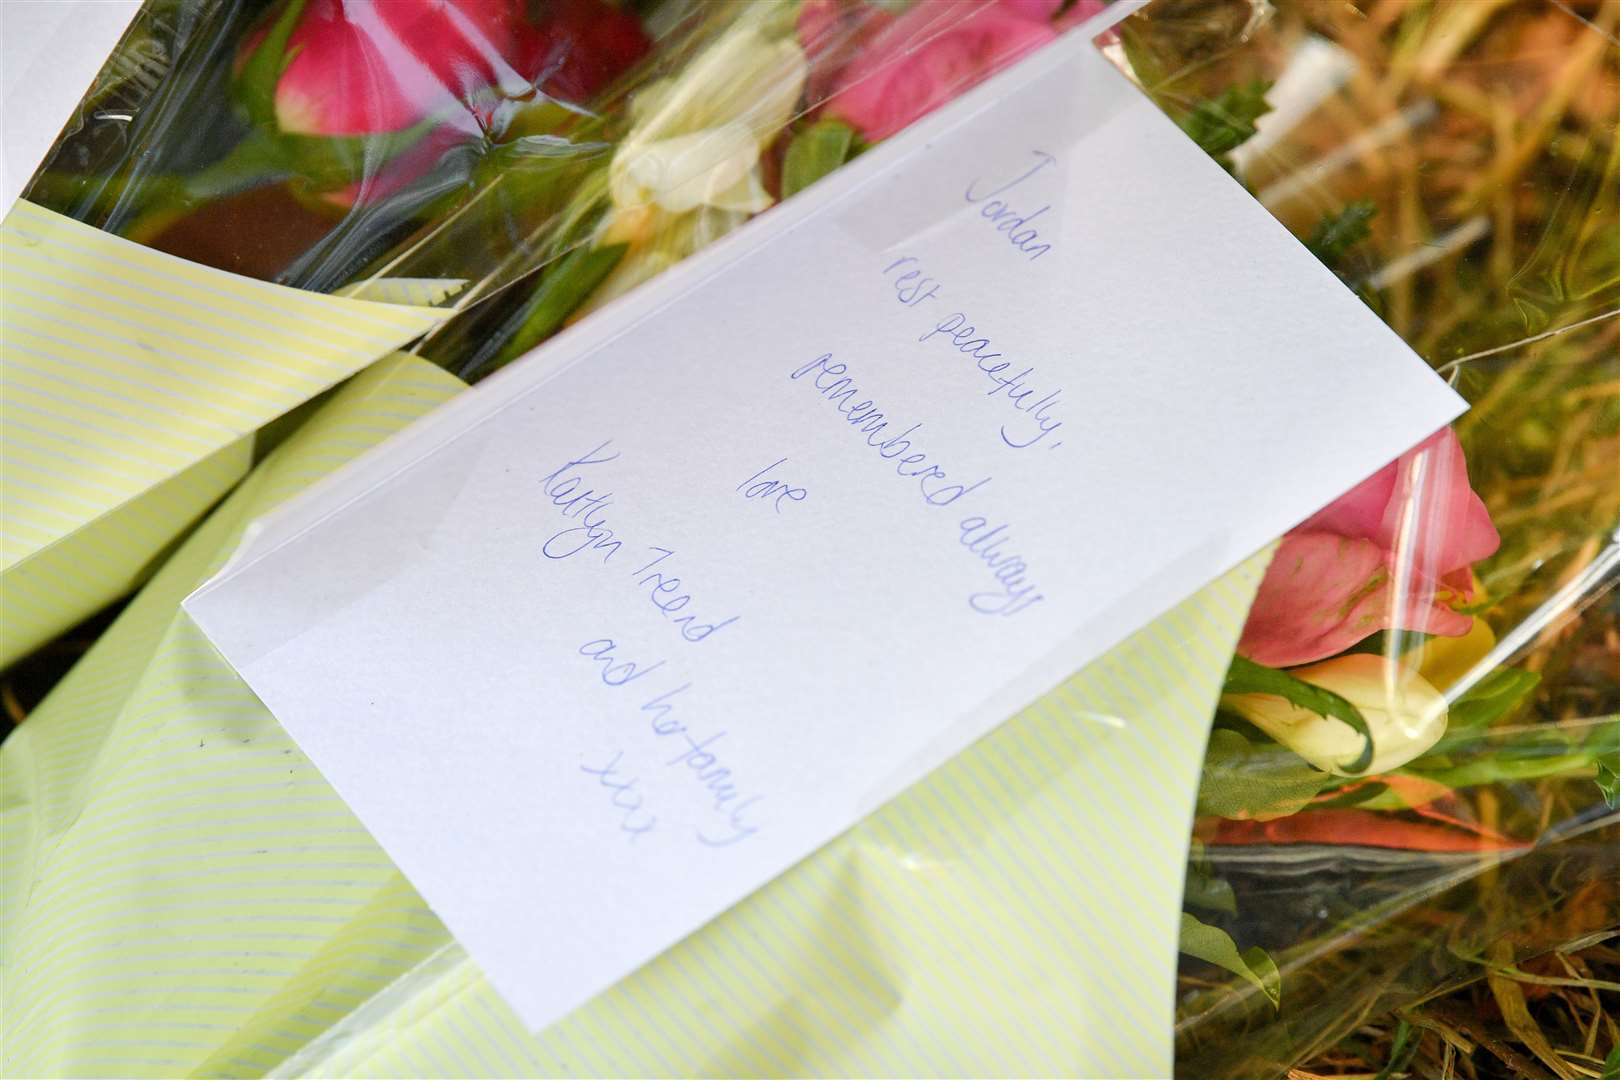 Floral tributes have been left at the scene of the crash (Ben Birchall/PA).